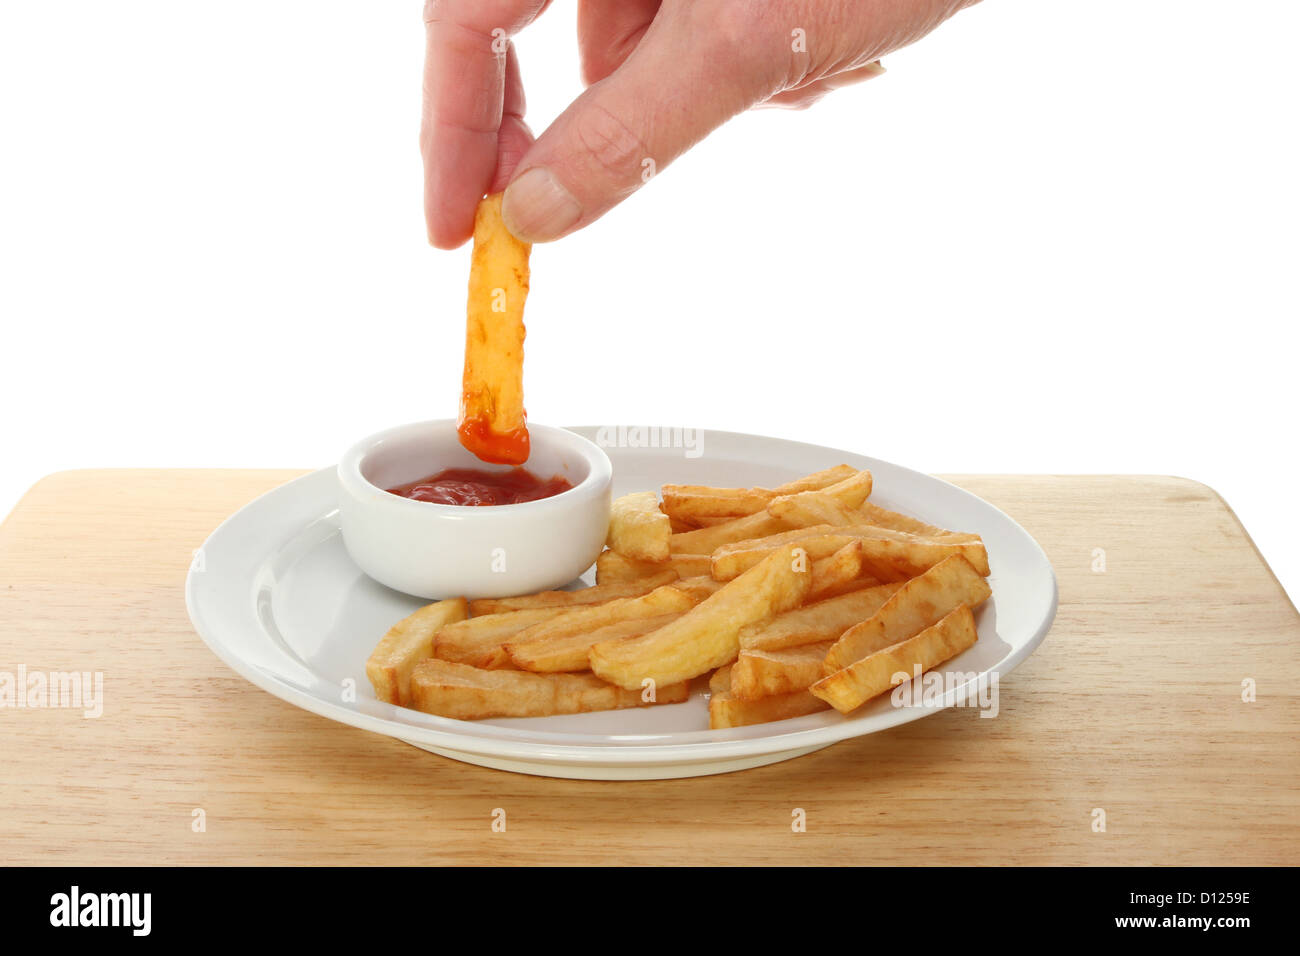 Hand dipping a potato chip into tomato ketchup in a ramekin next to chips on a plate Stock Photo